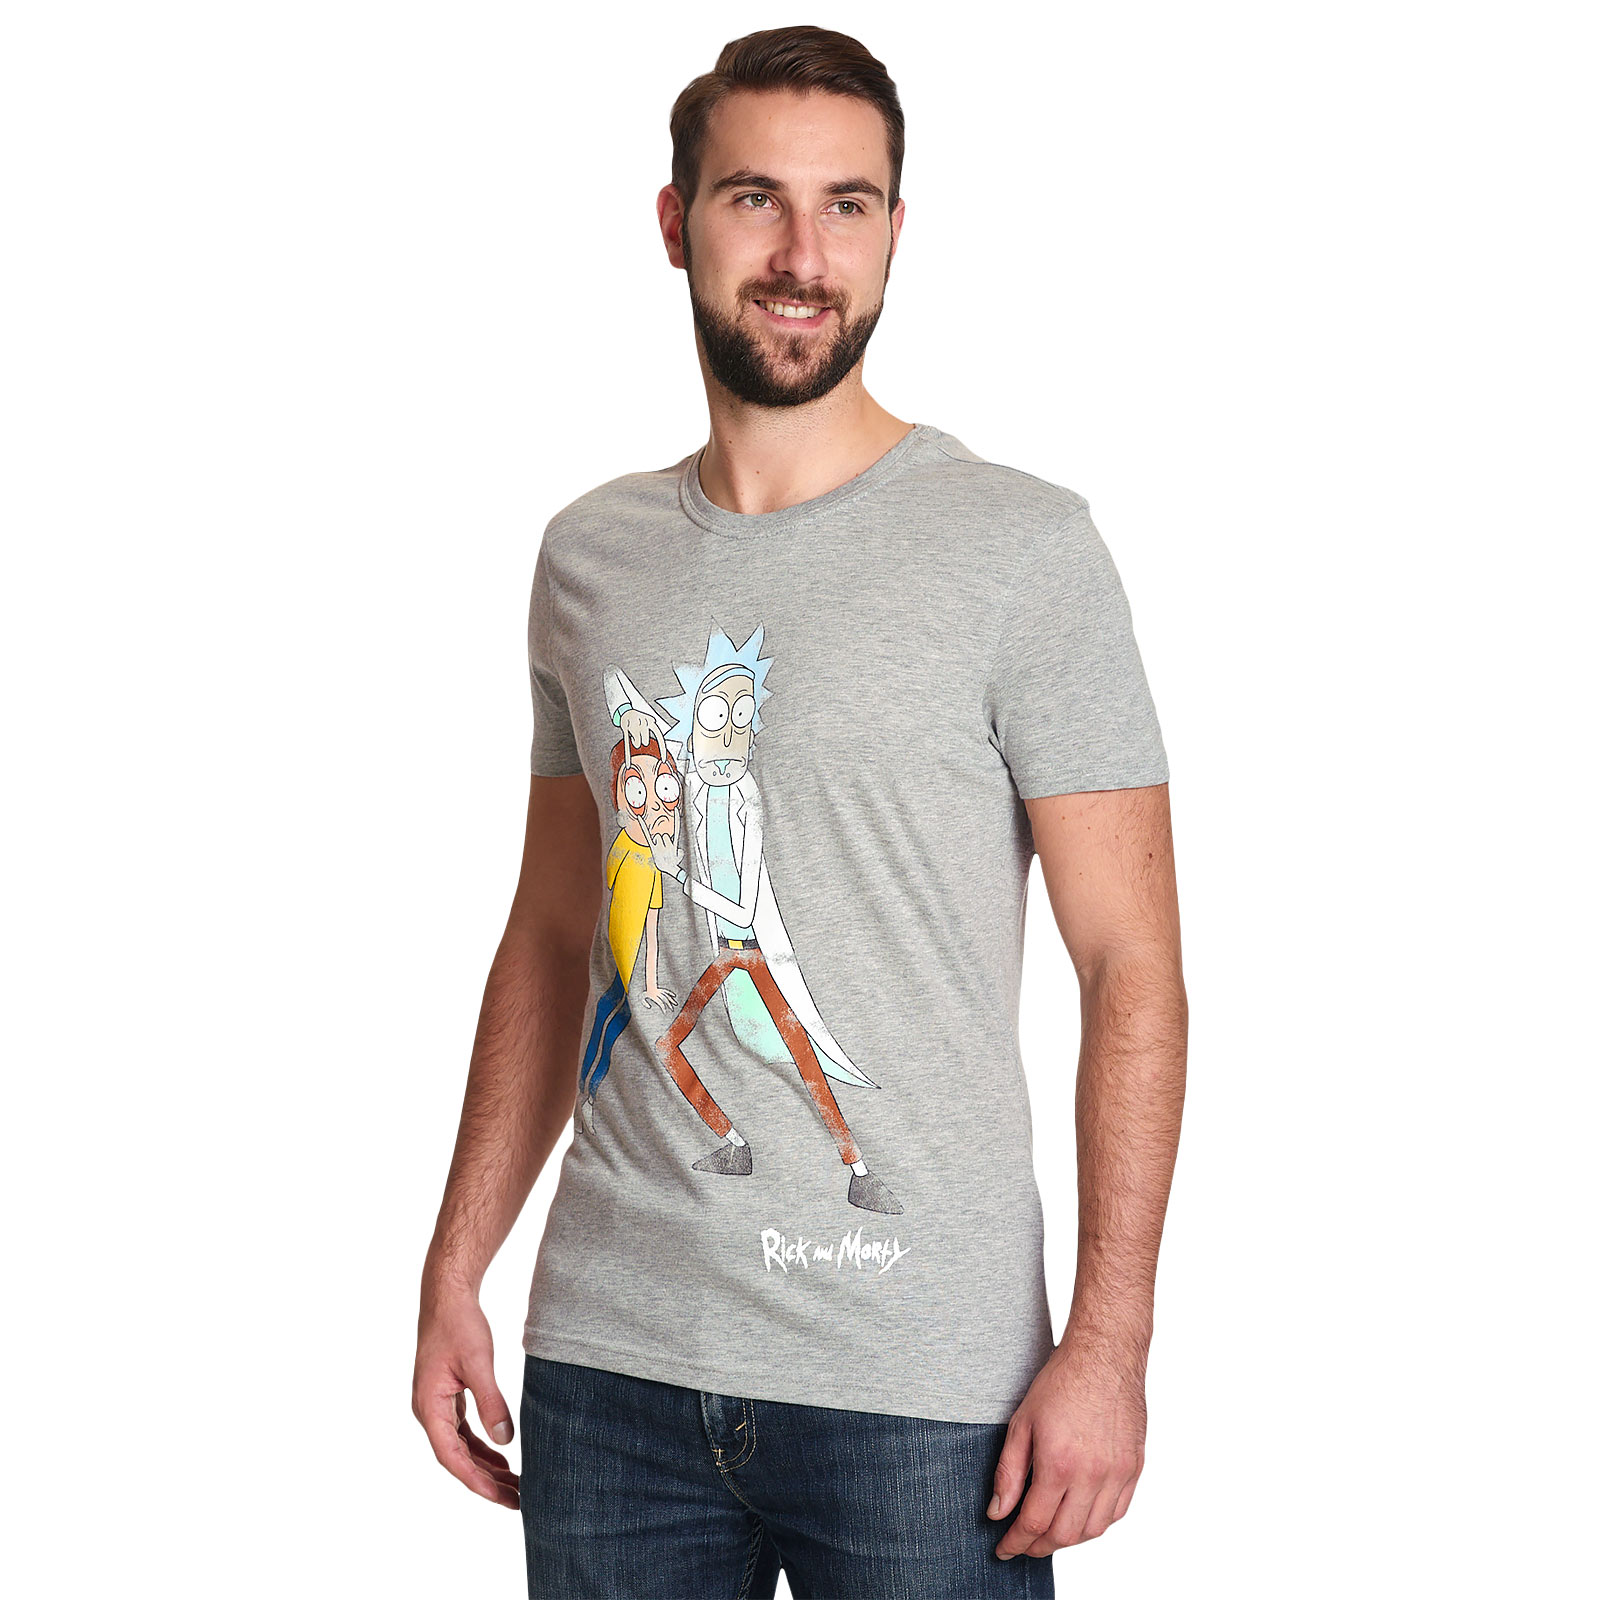 Rick and Morty - Morty Eye Edit Distressed T-Shirt grey